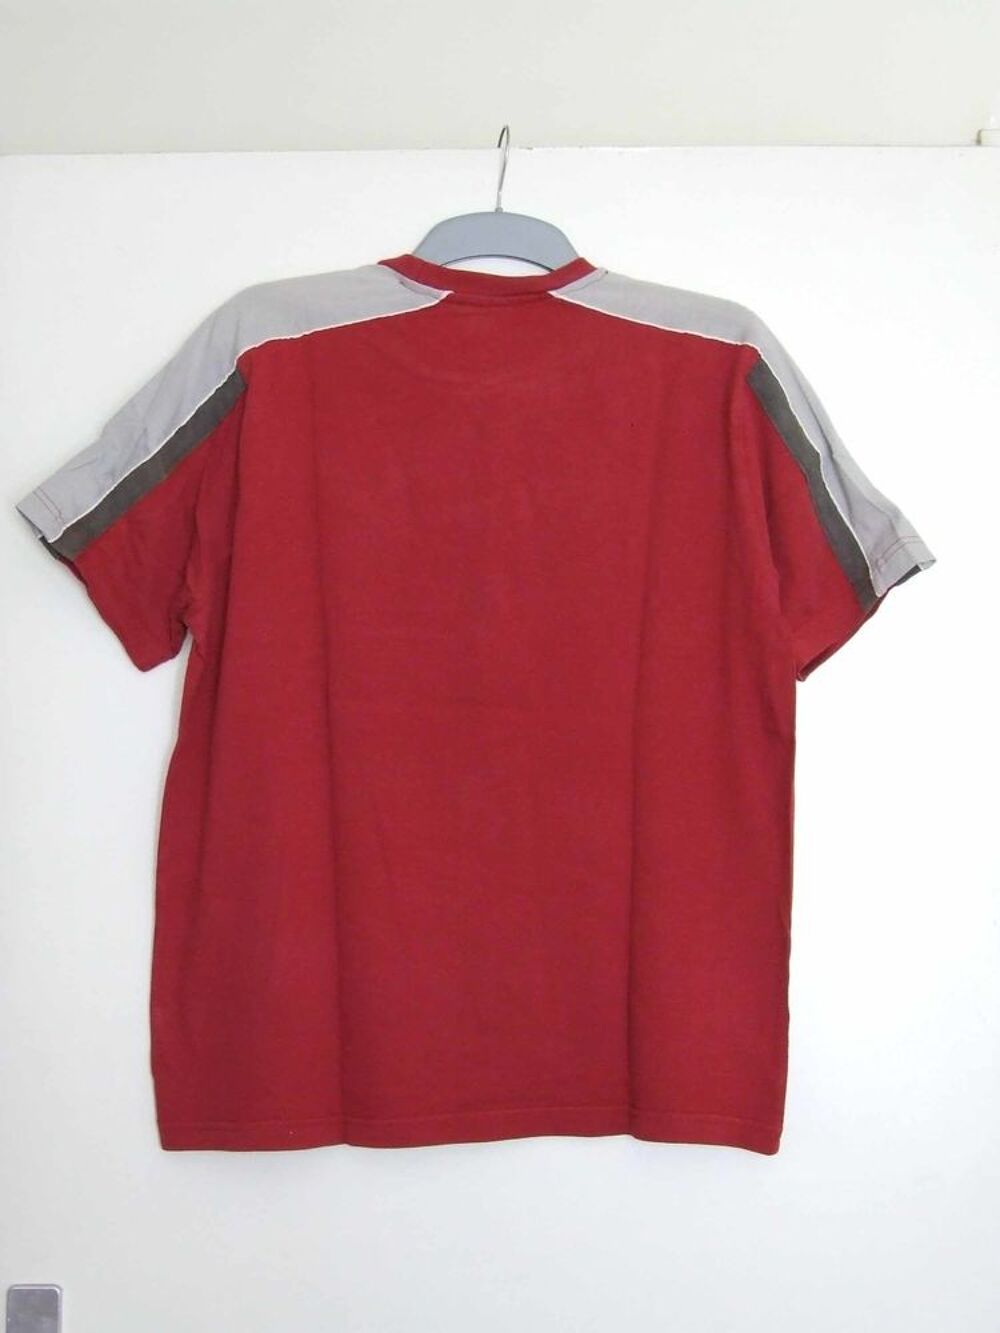 Tee-shirt col rond, CELIO, Rouge, Taille L, TBE Vtements